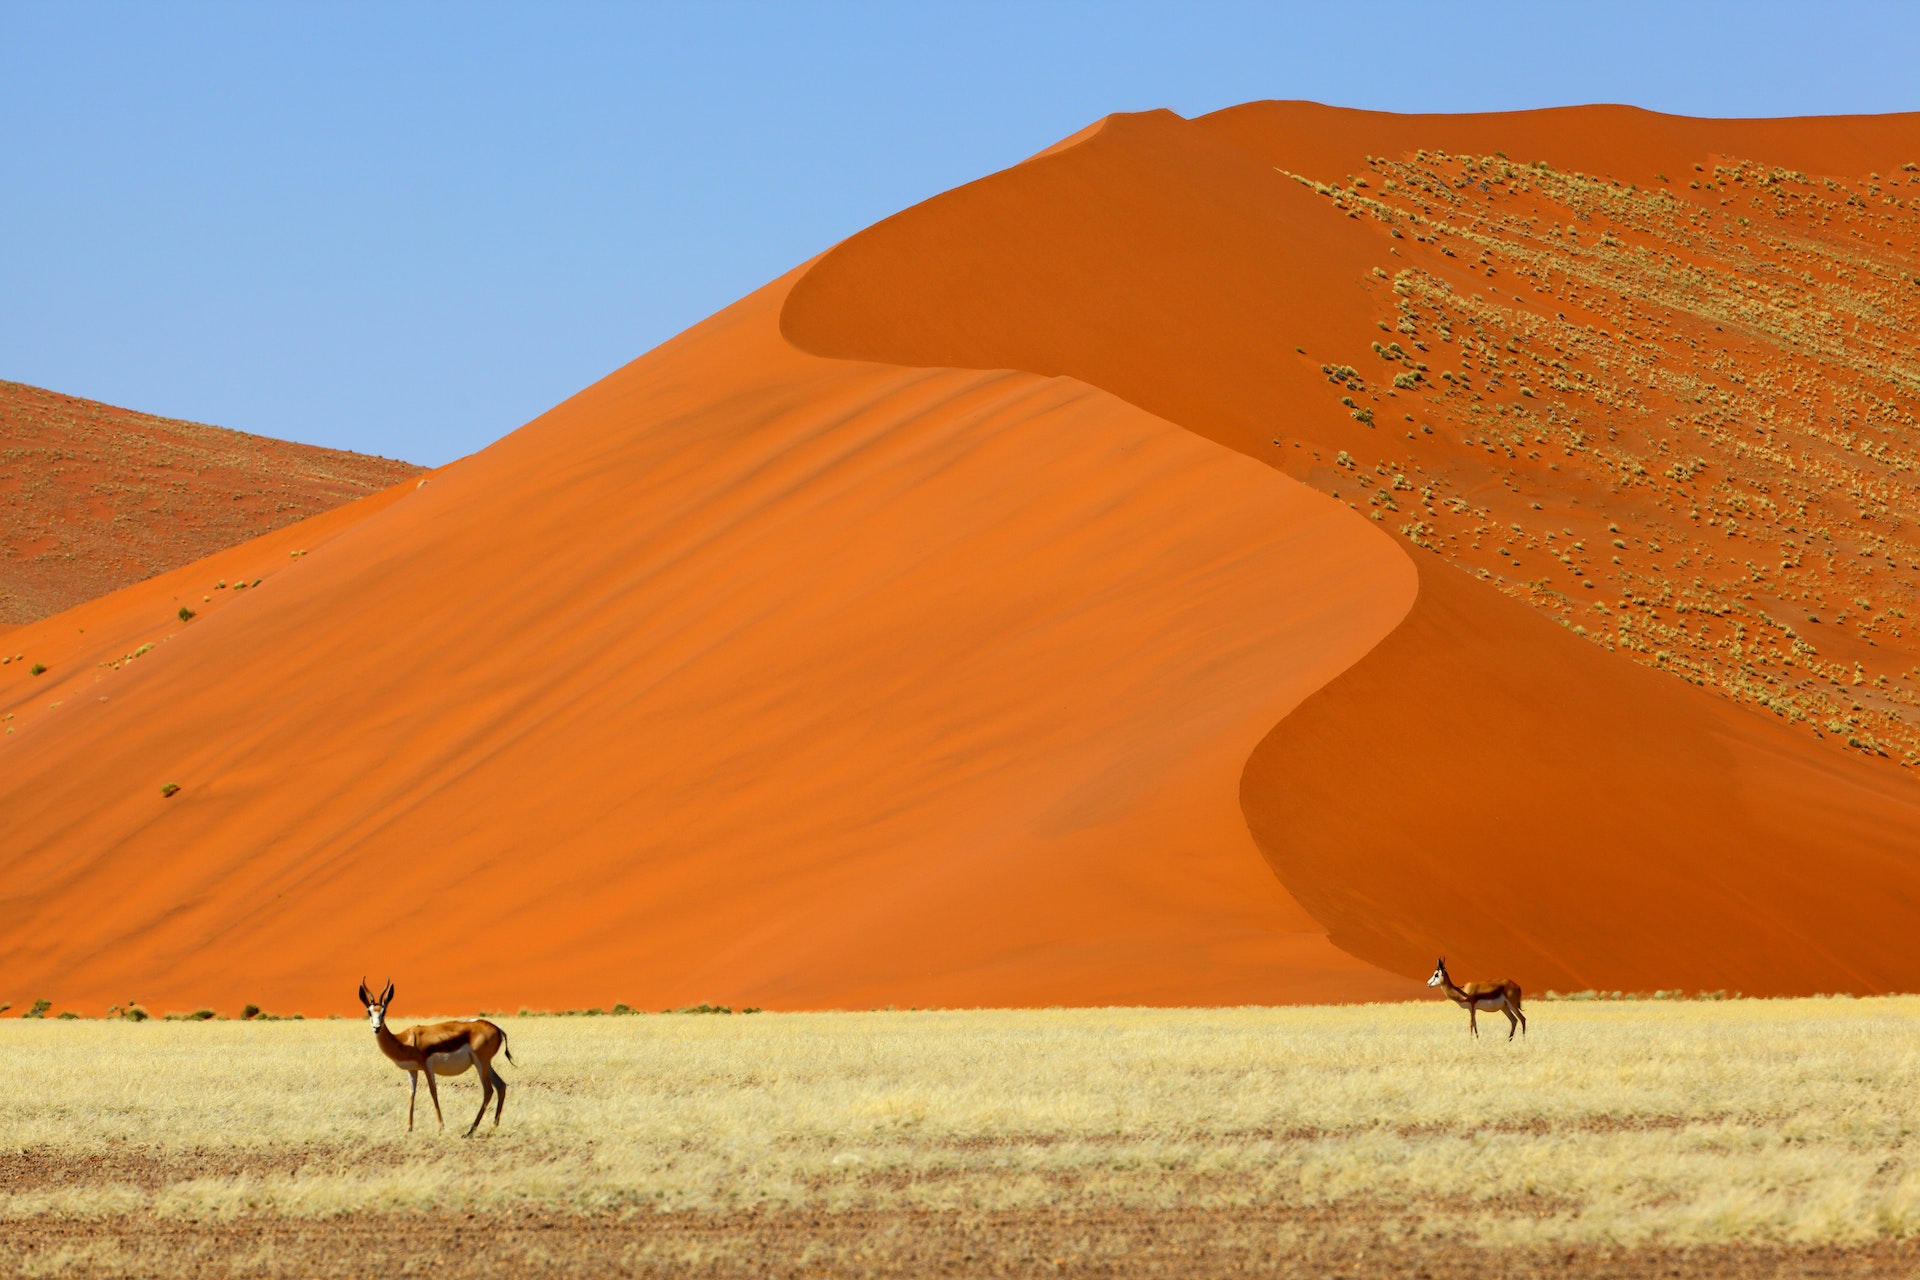 Springbok at large red sand dunes in Kgalagadi Transfrontier Park